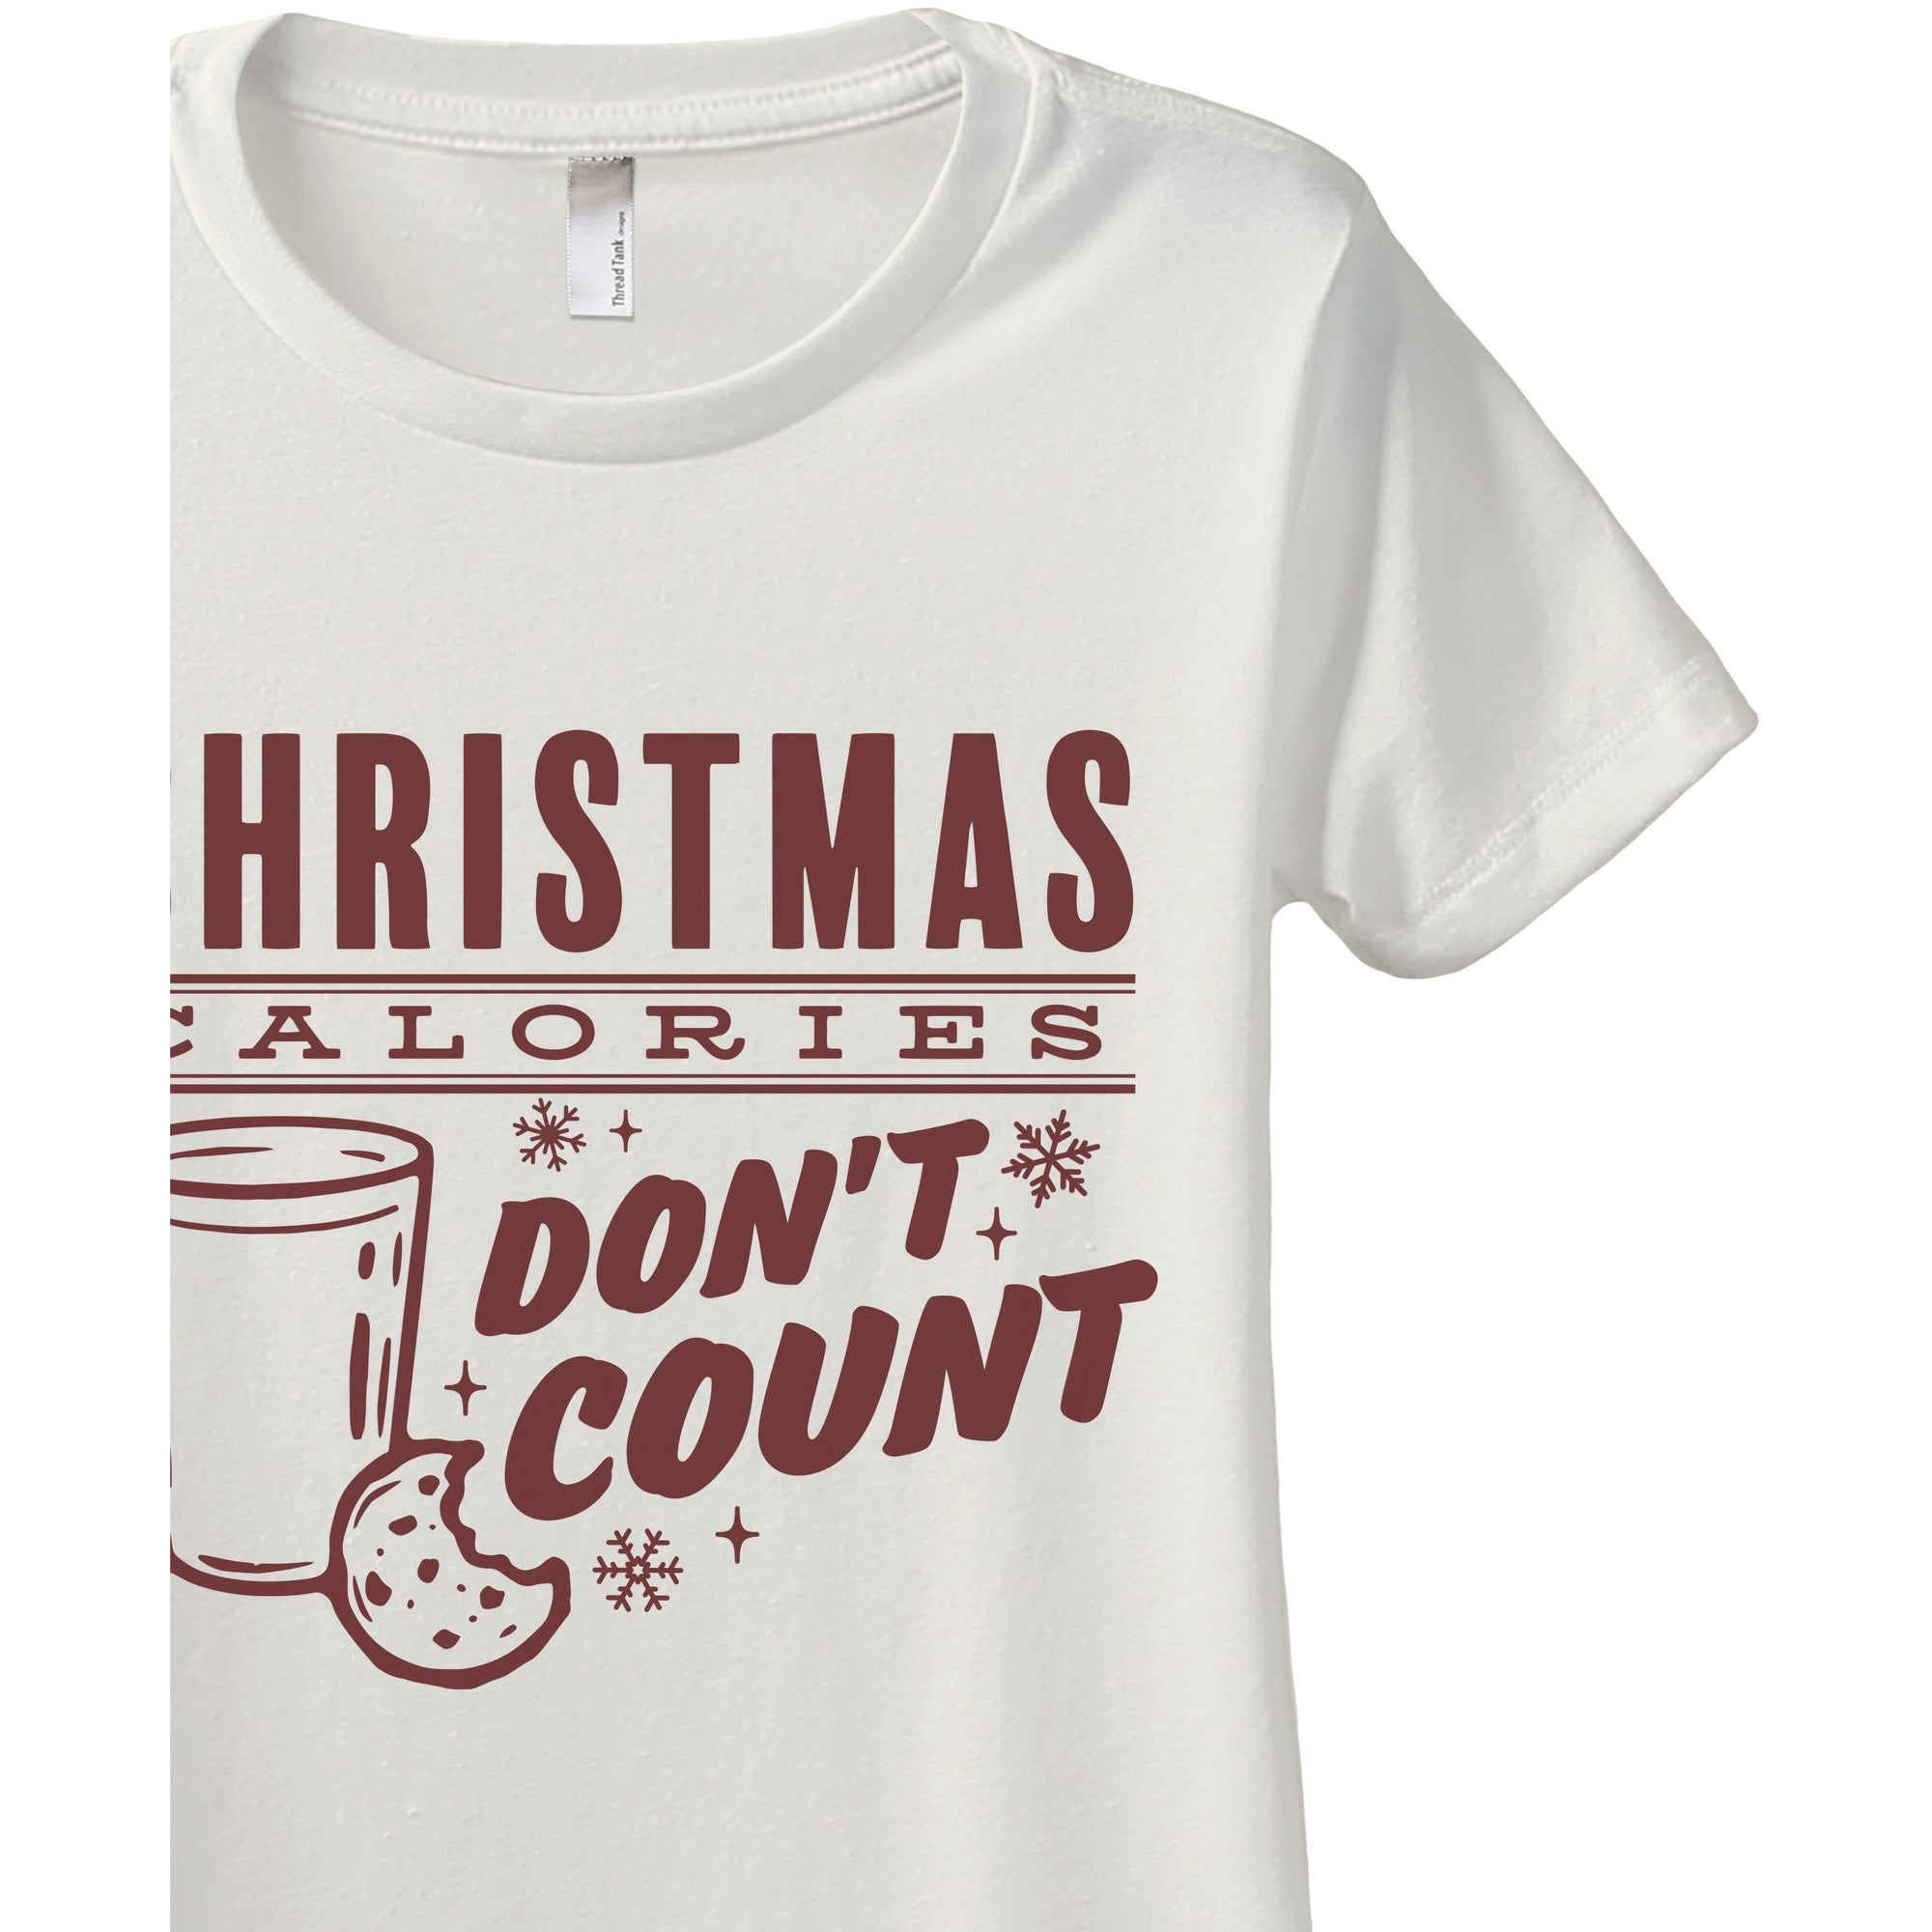 Christmas Calories Don't Count Women's Relaxed Crewneck T-Shirt Top Tee Vintage White Zoom Details
